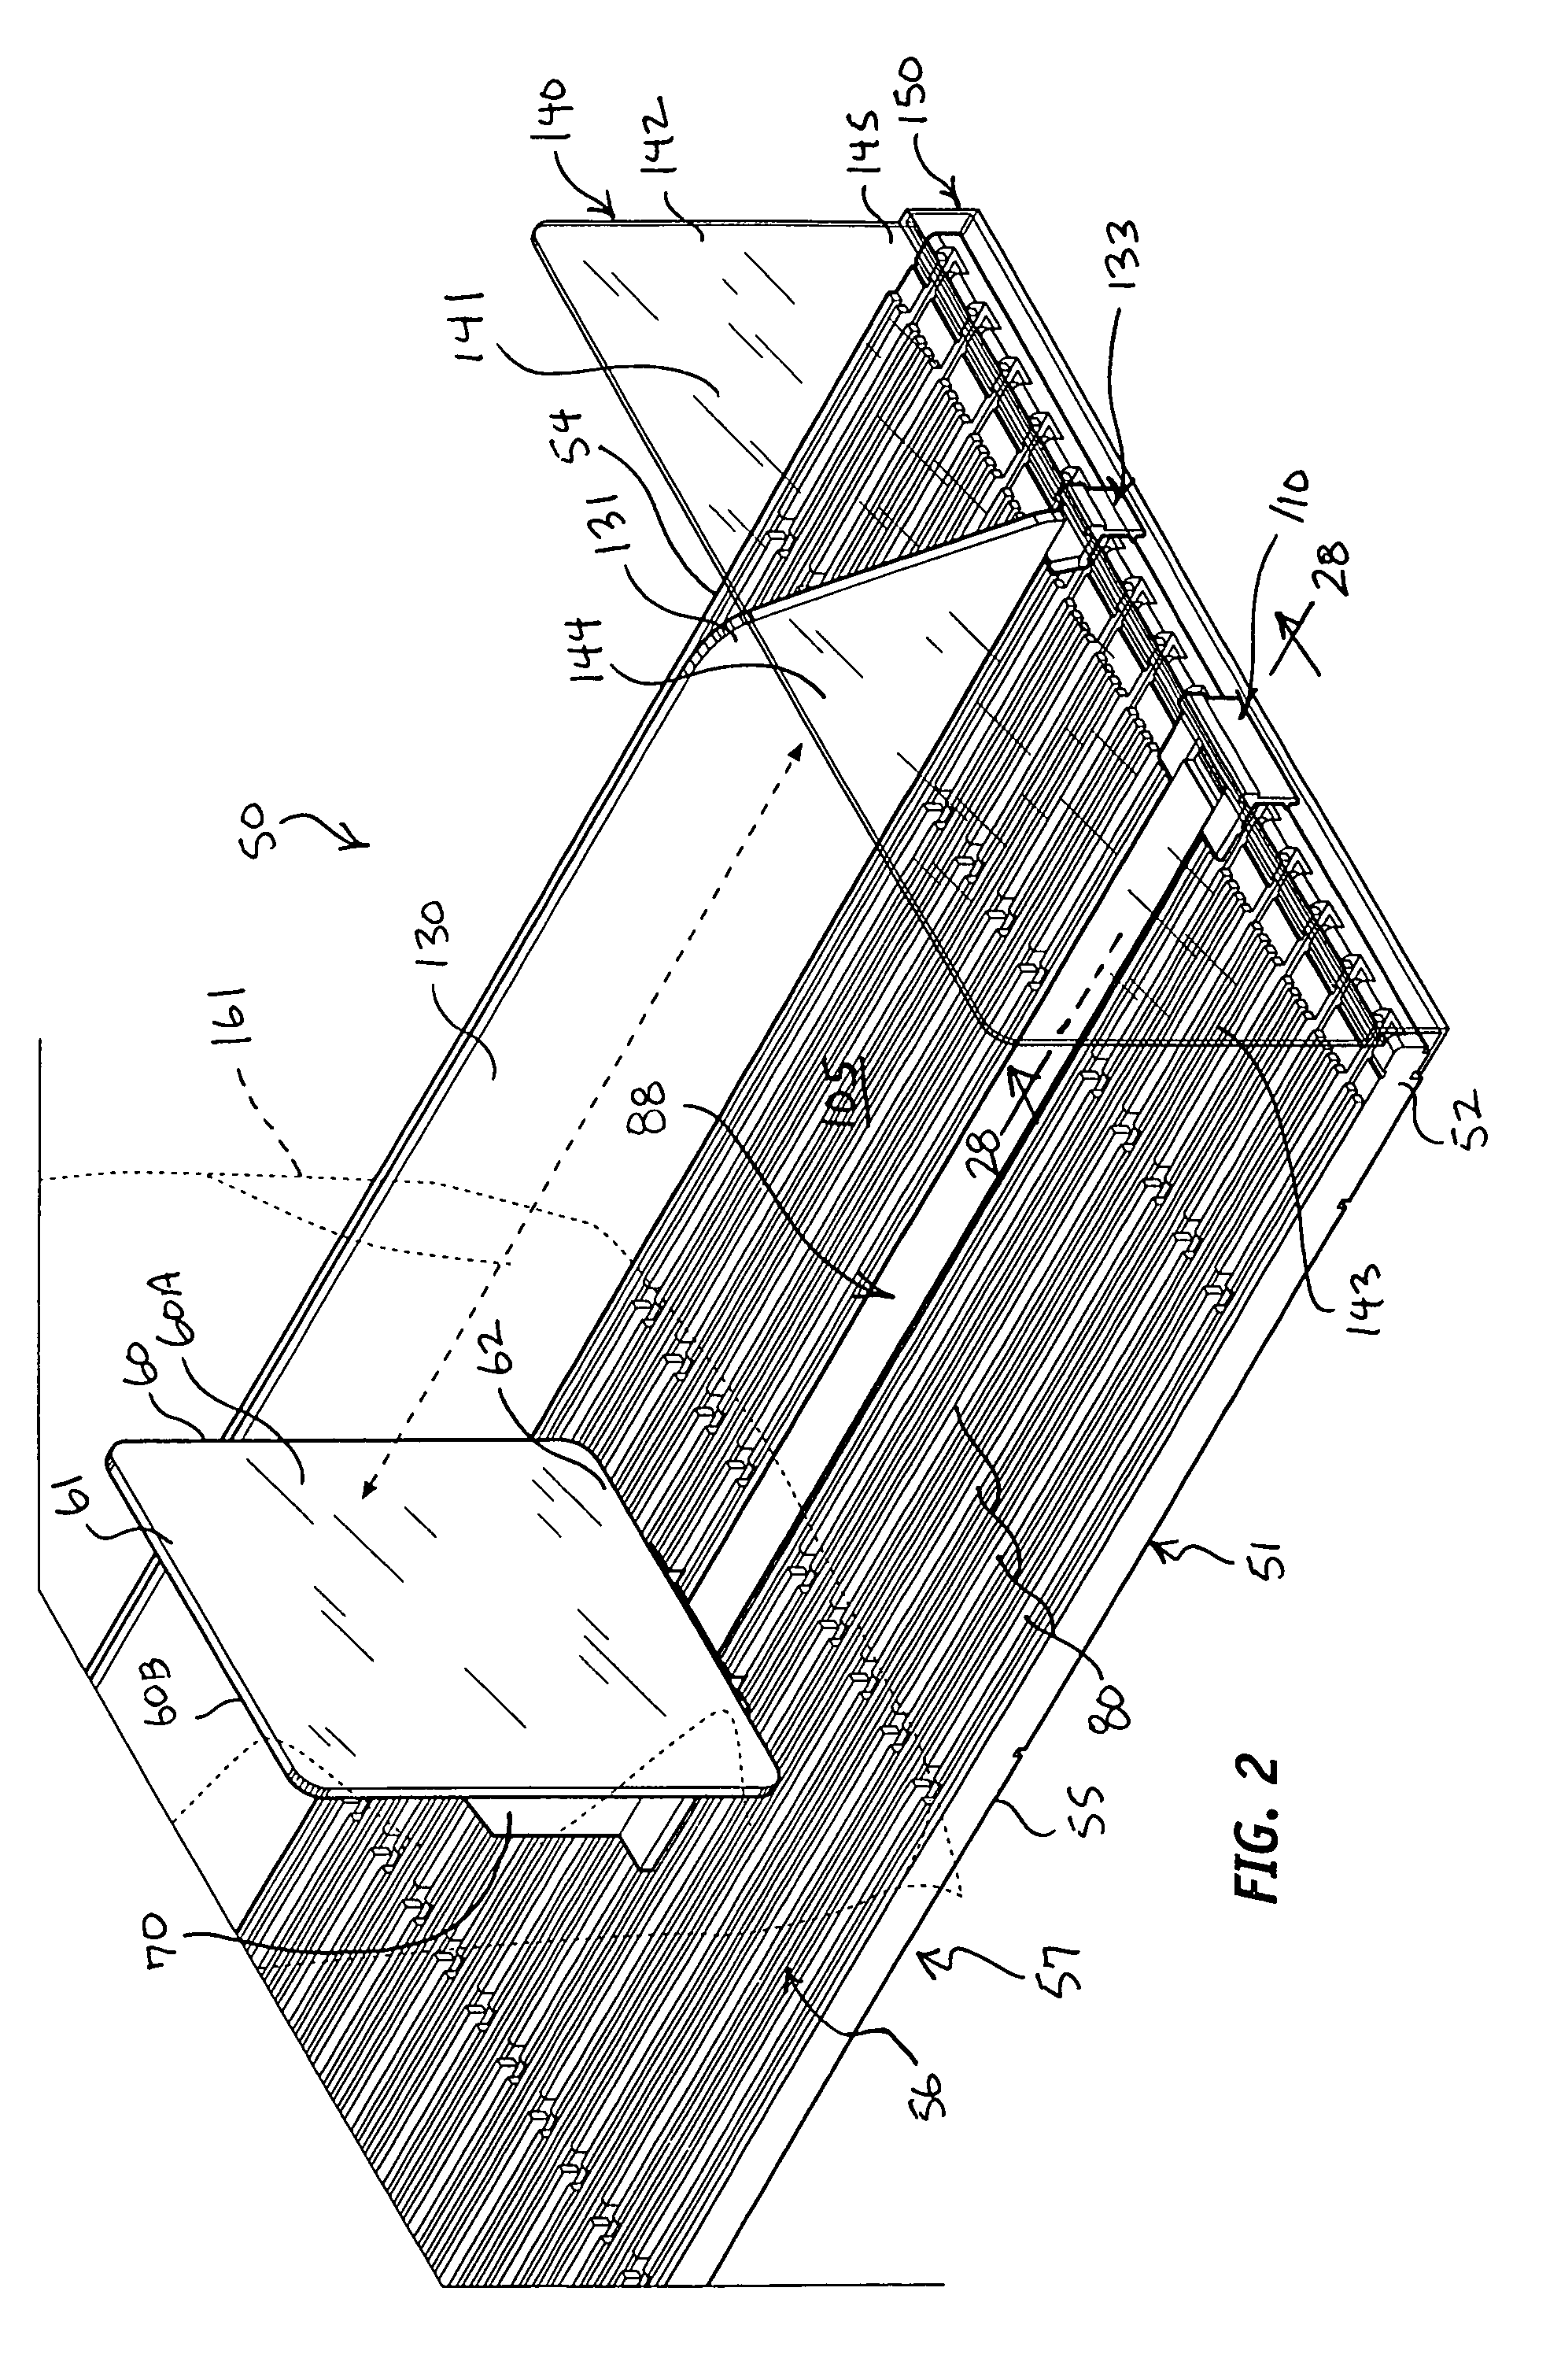 Apparatus for holding and feeding product